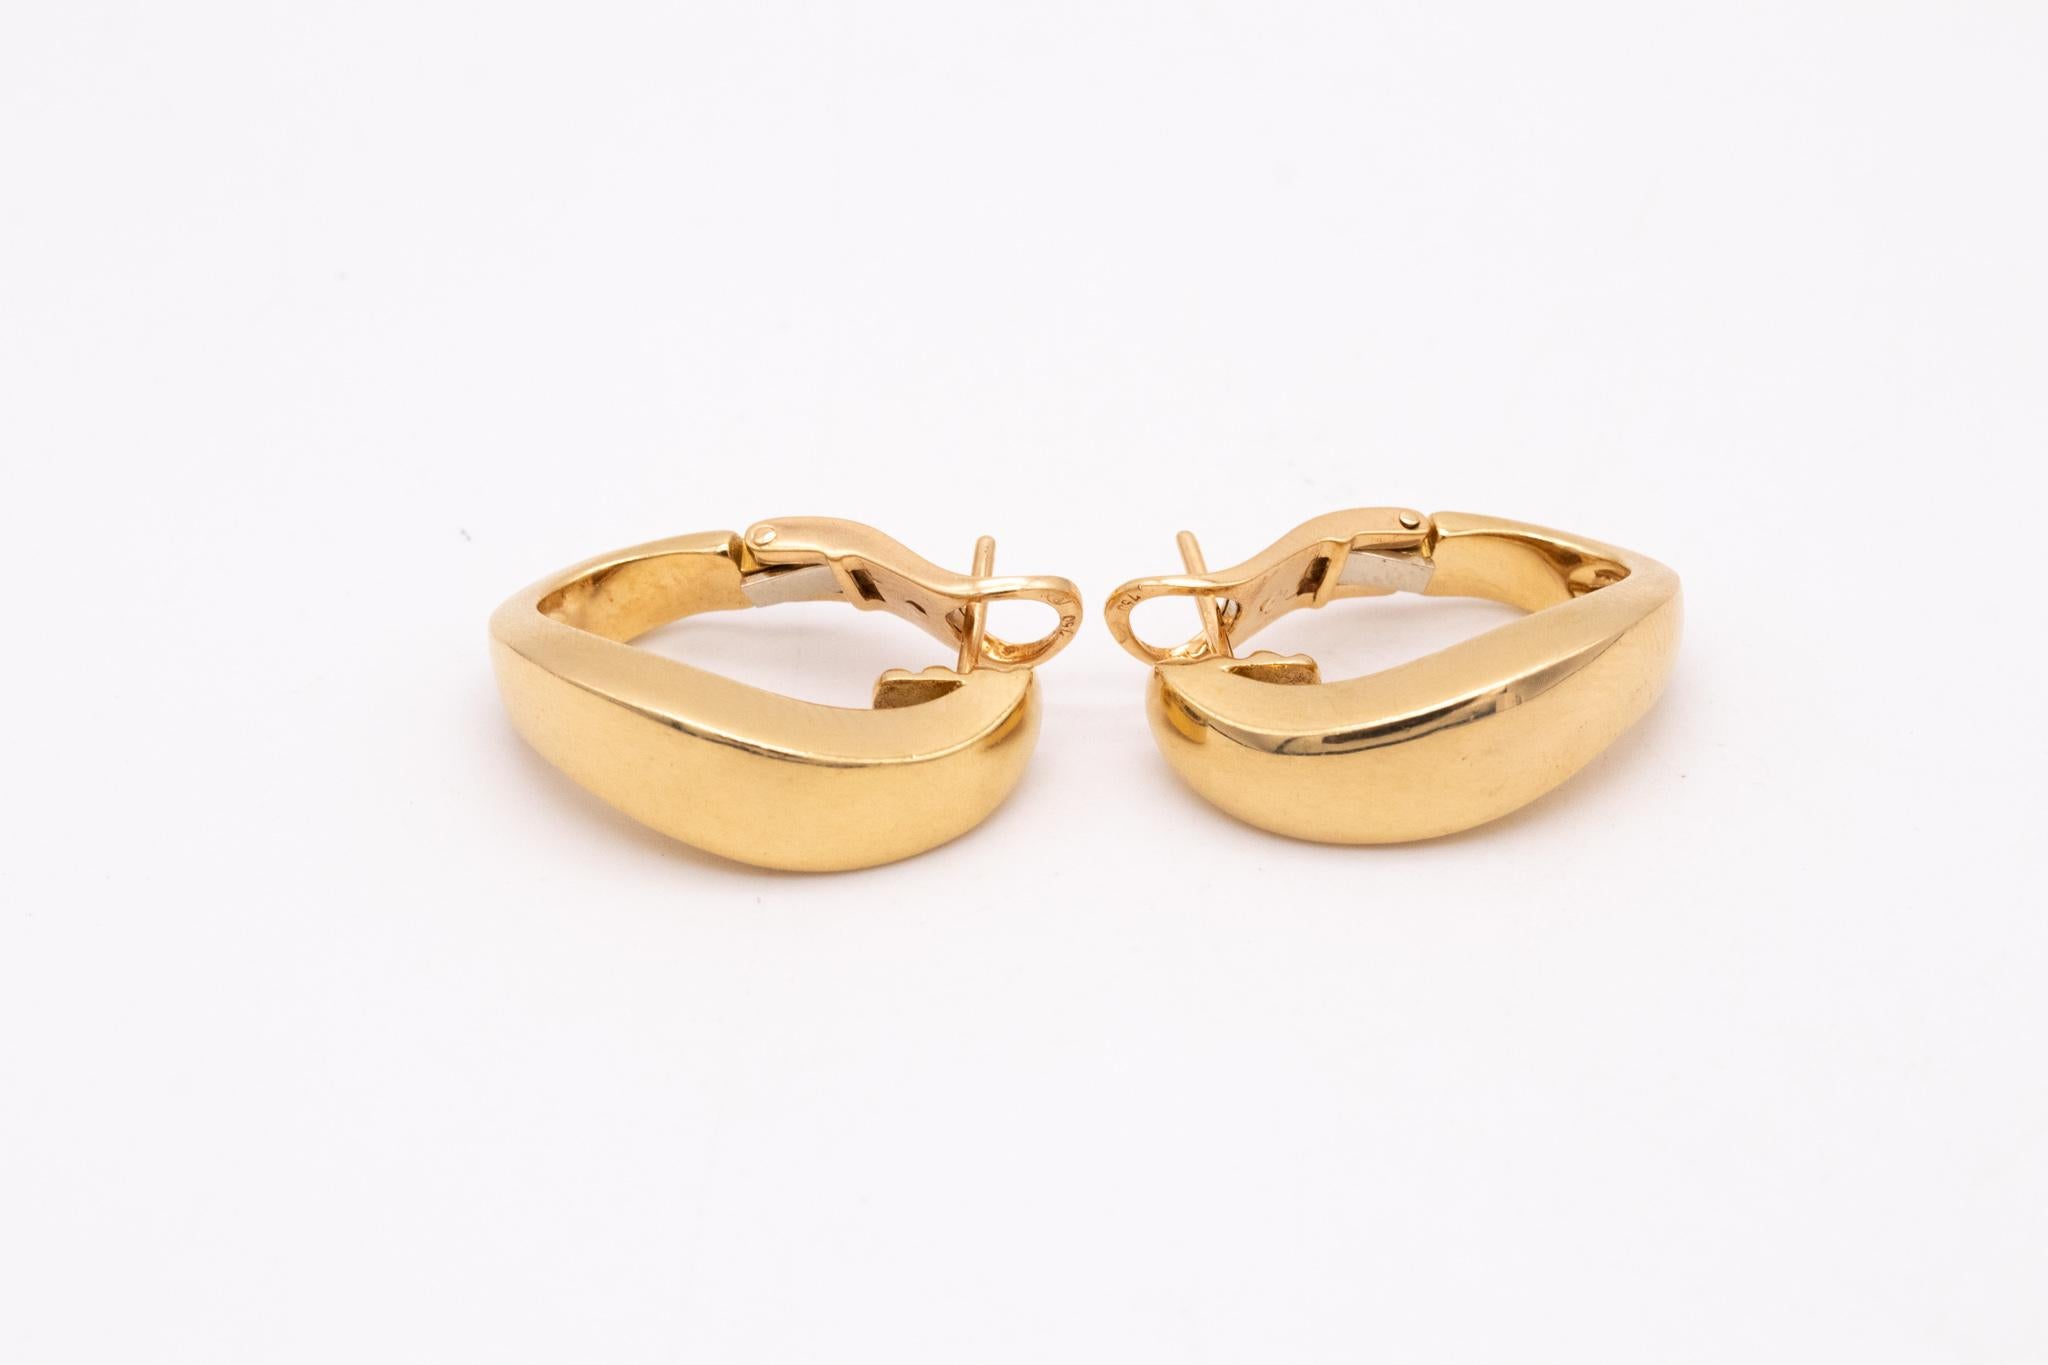 Pair of free form hoops designed by Chaumet.

A vintage pair crafted in Paris, France in solid 18 karats of polished yellow gold. suited with posts (removable) and omega backs for fastening clips.

Have a total weight of 16.7 grams and a measures of